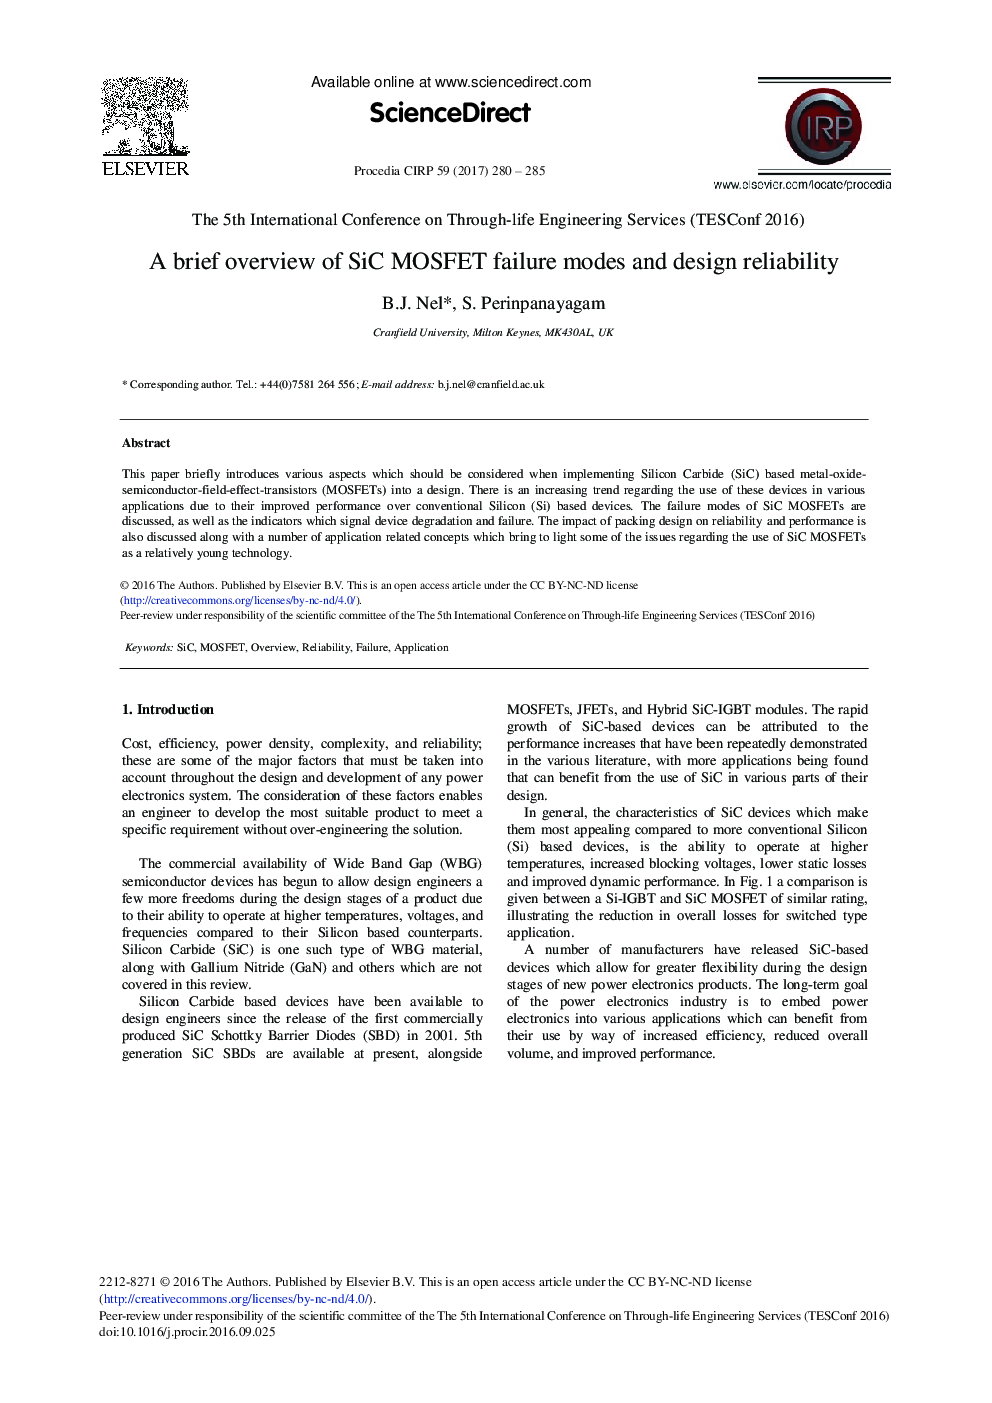 A Brief Overview of SiC MOSFET Failure Modes and Design Reliability